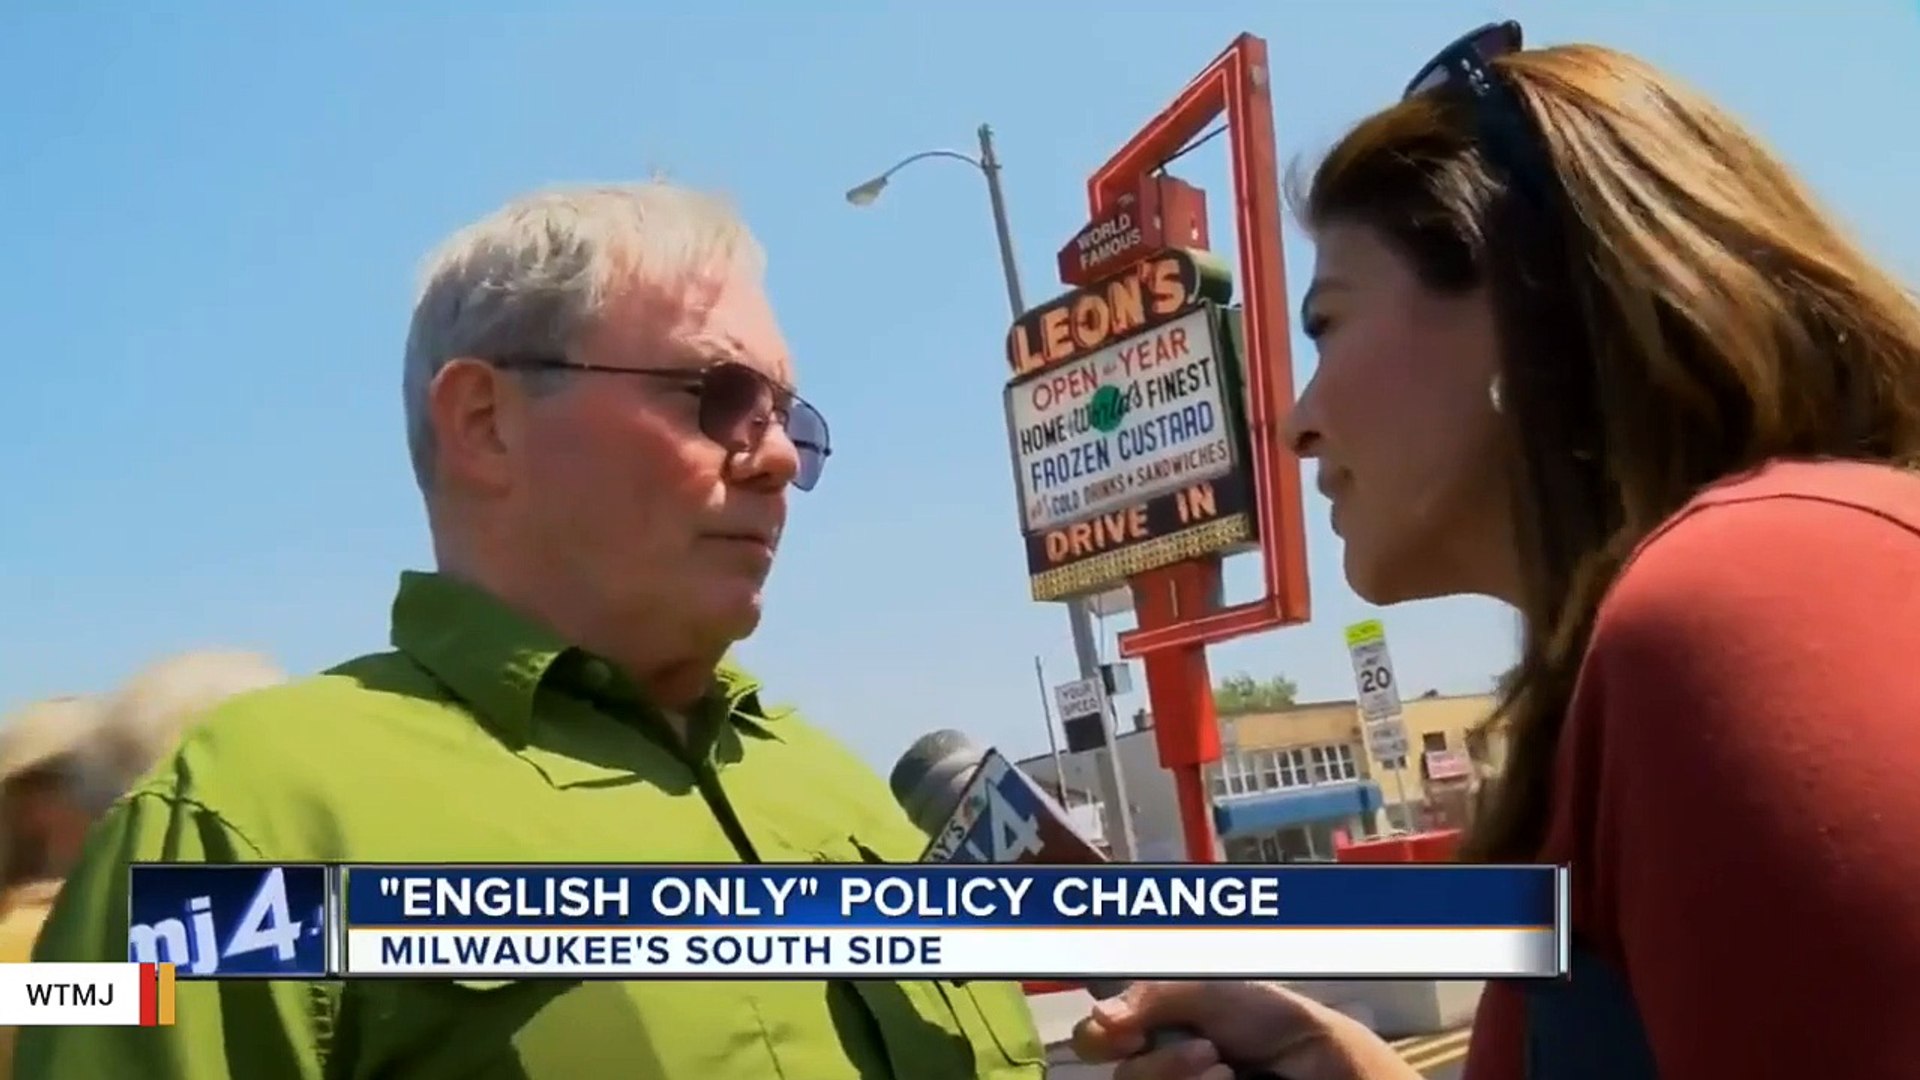 Shop Owner In Milwaukee Criticized For English-Only Policy